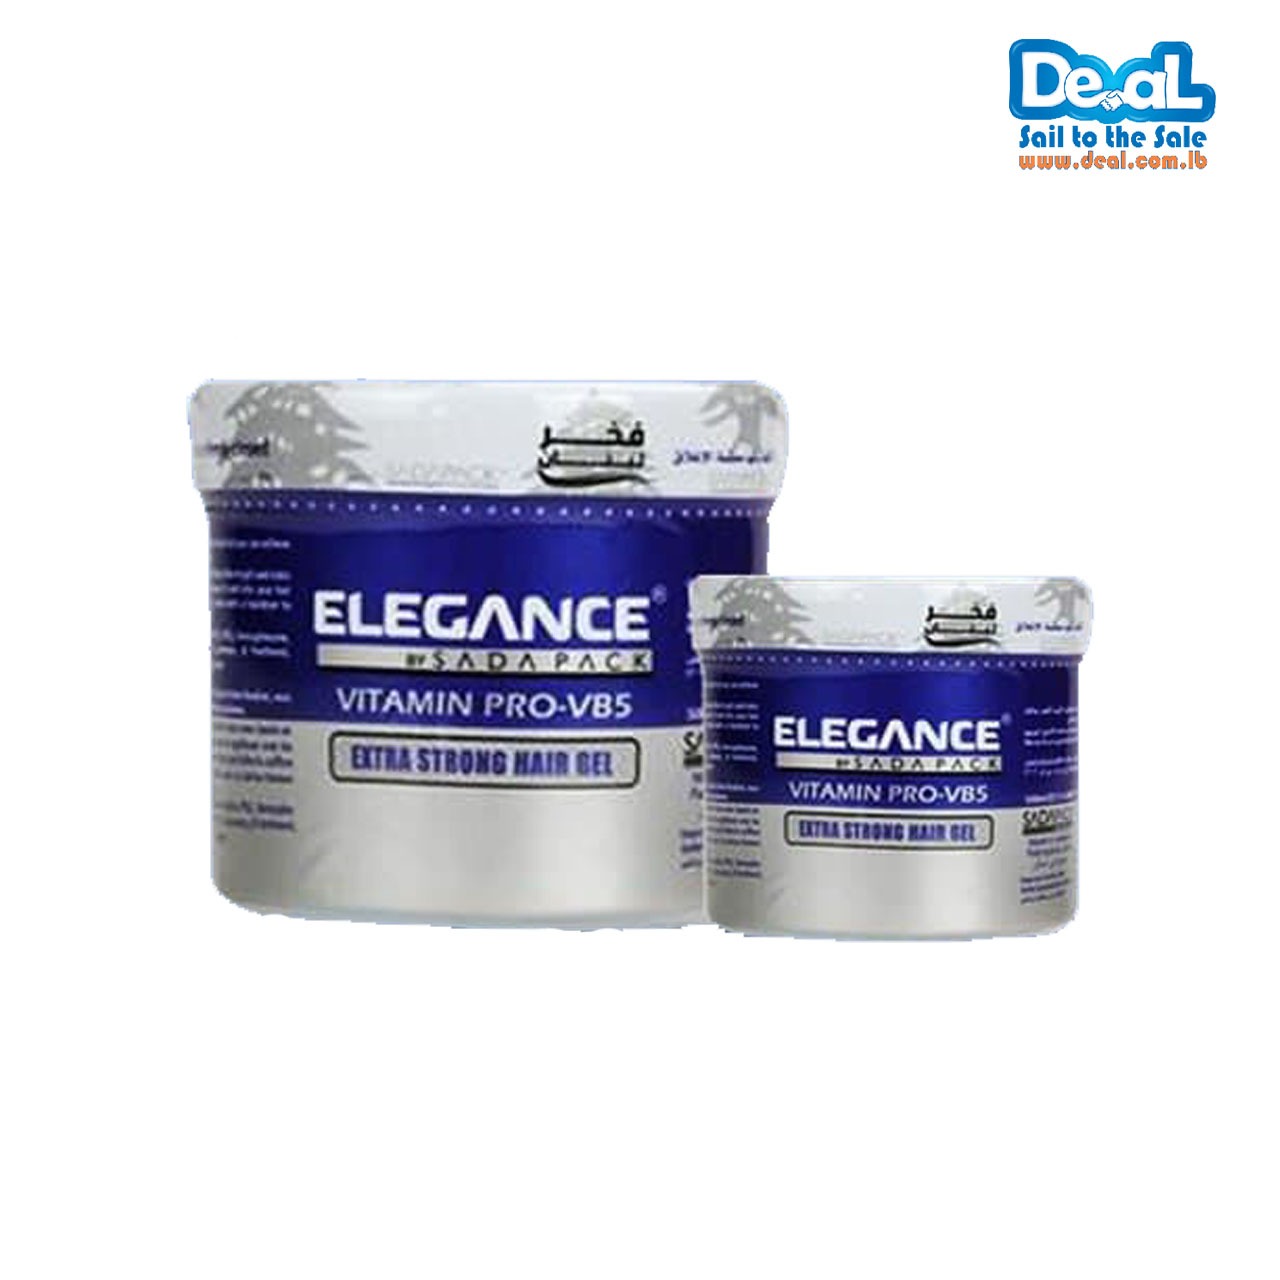 Elegance By Sada Pack Extra Strong Hair Gel 250 ML and 100 ML